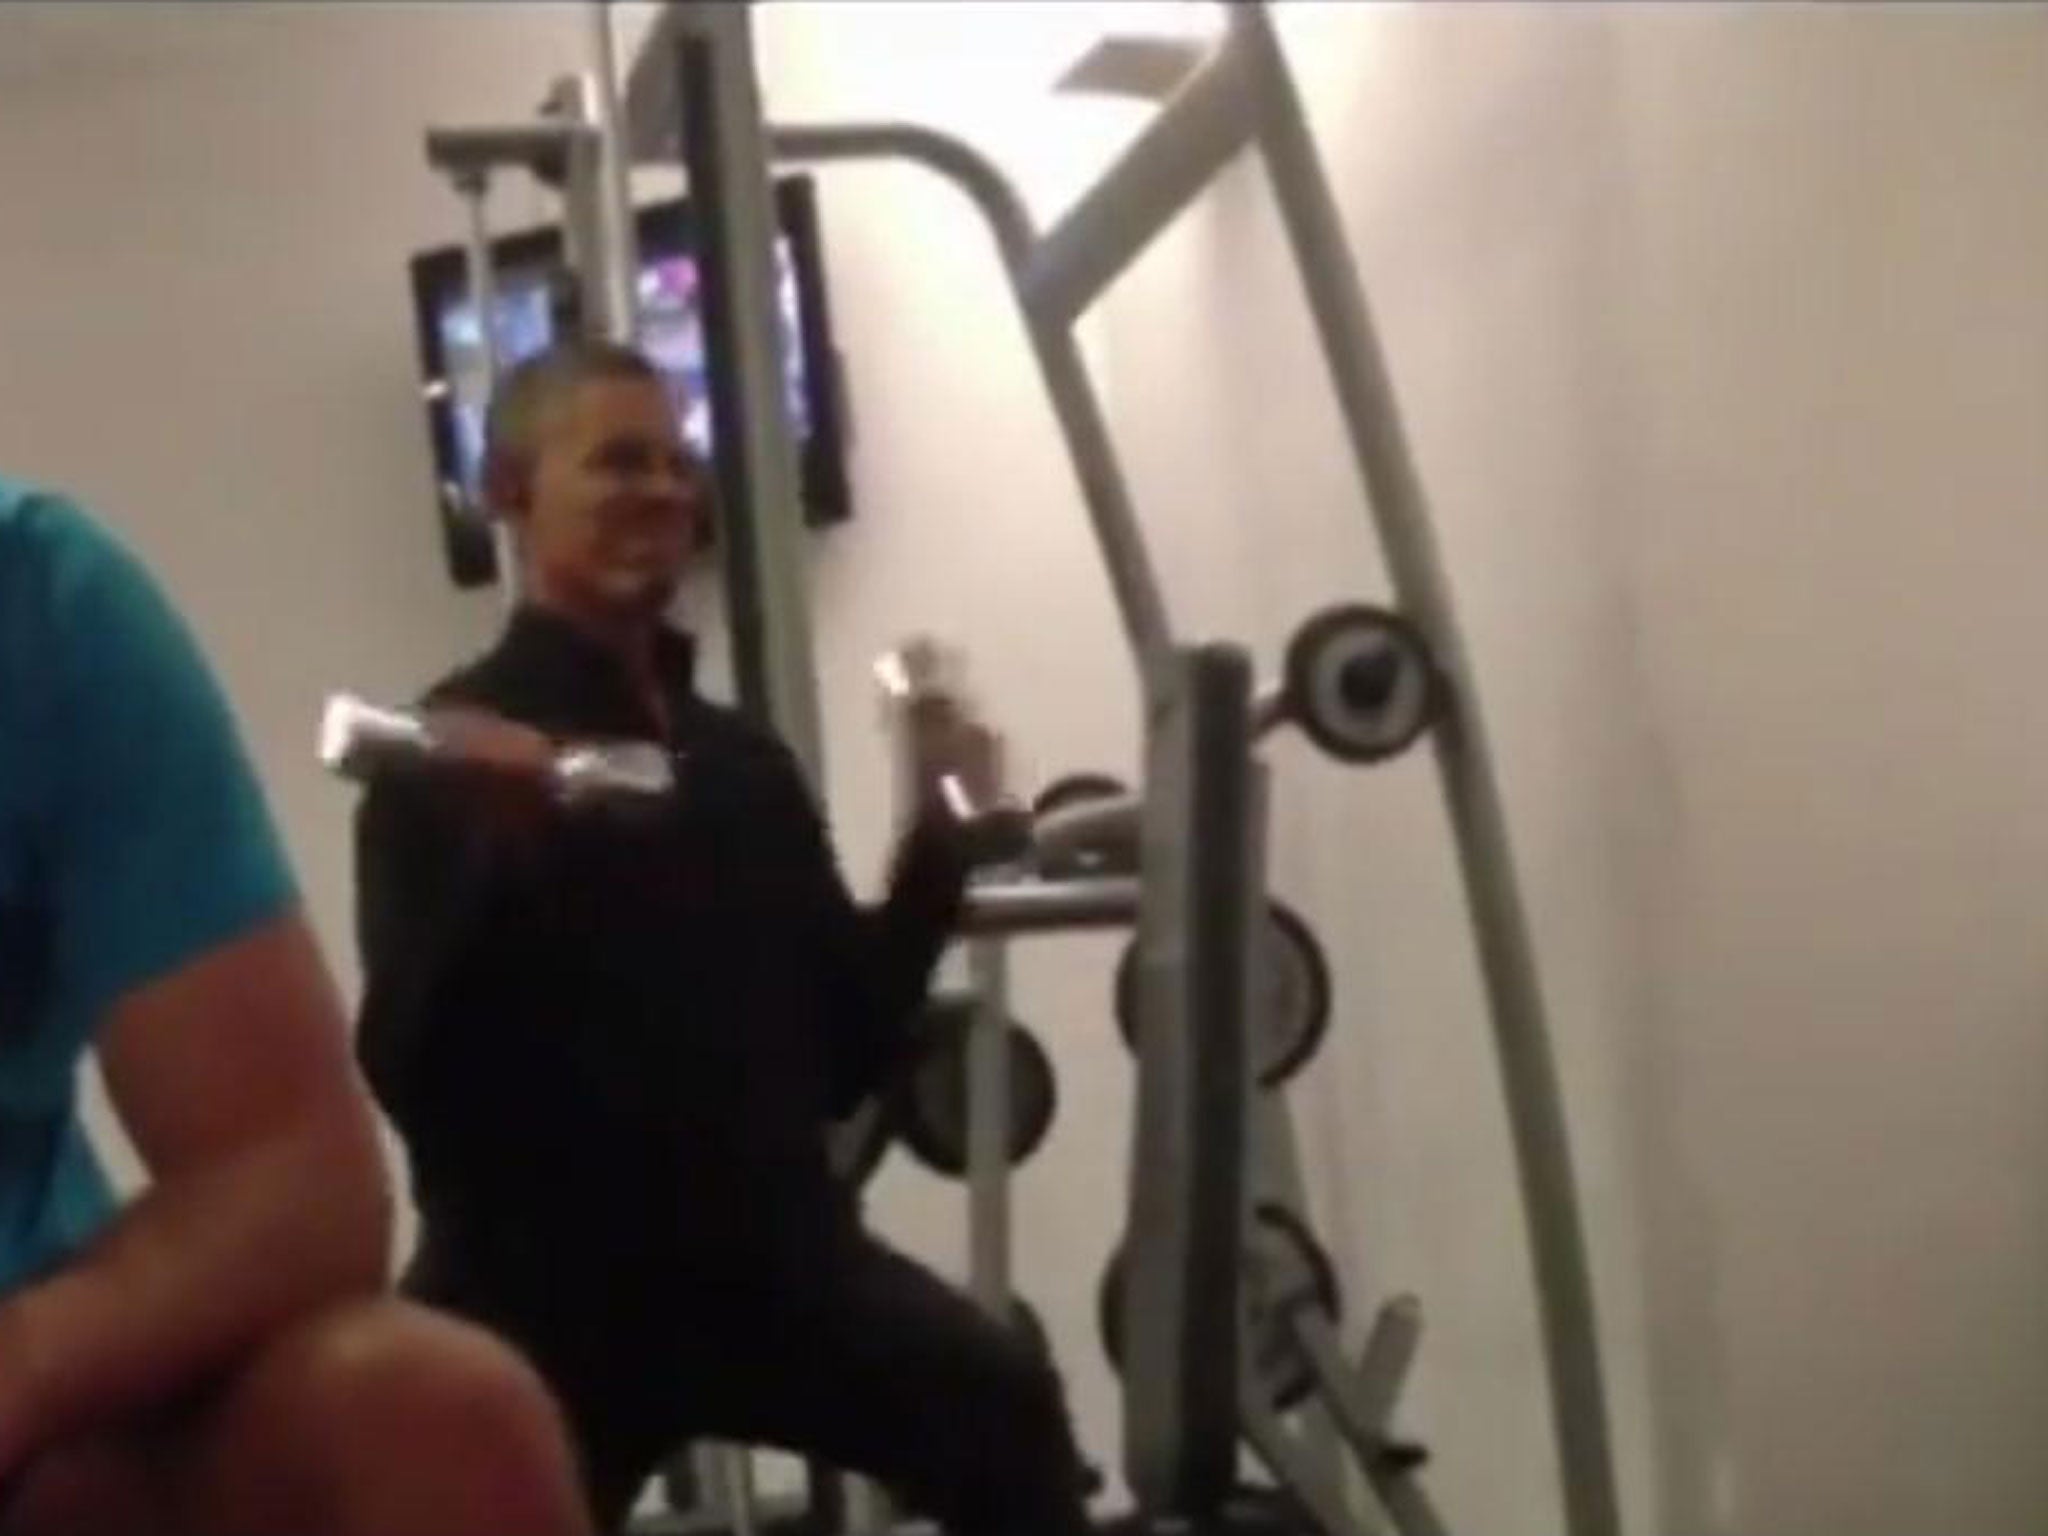 President Obama flexing some muscle at the gym